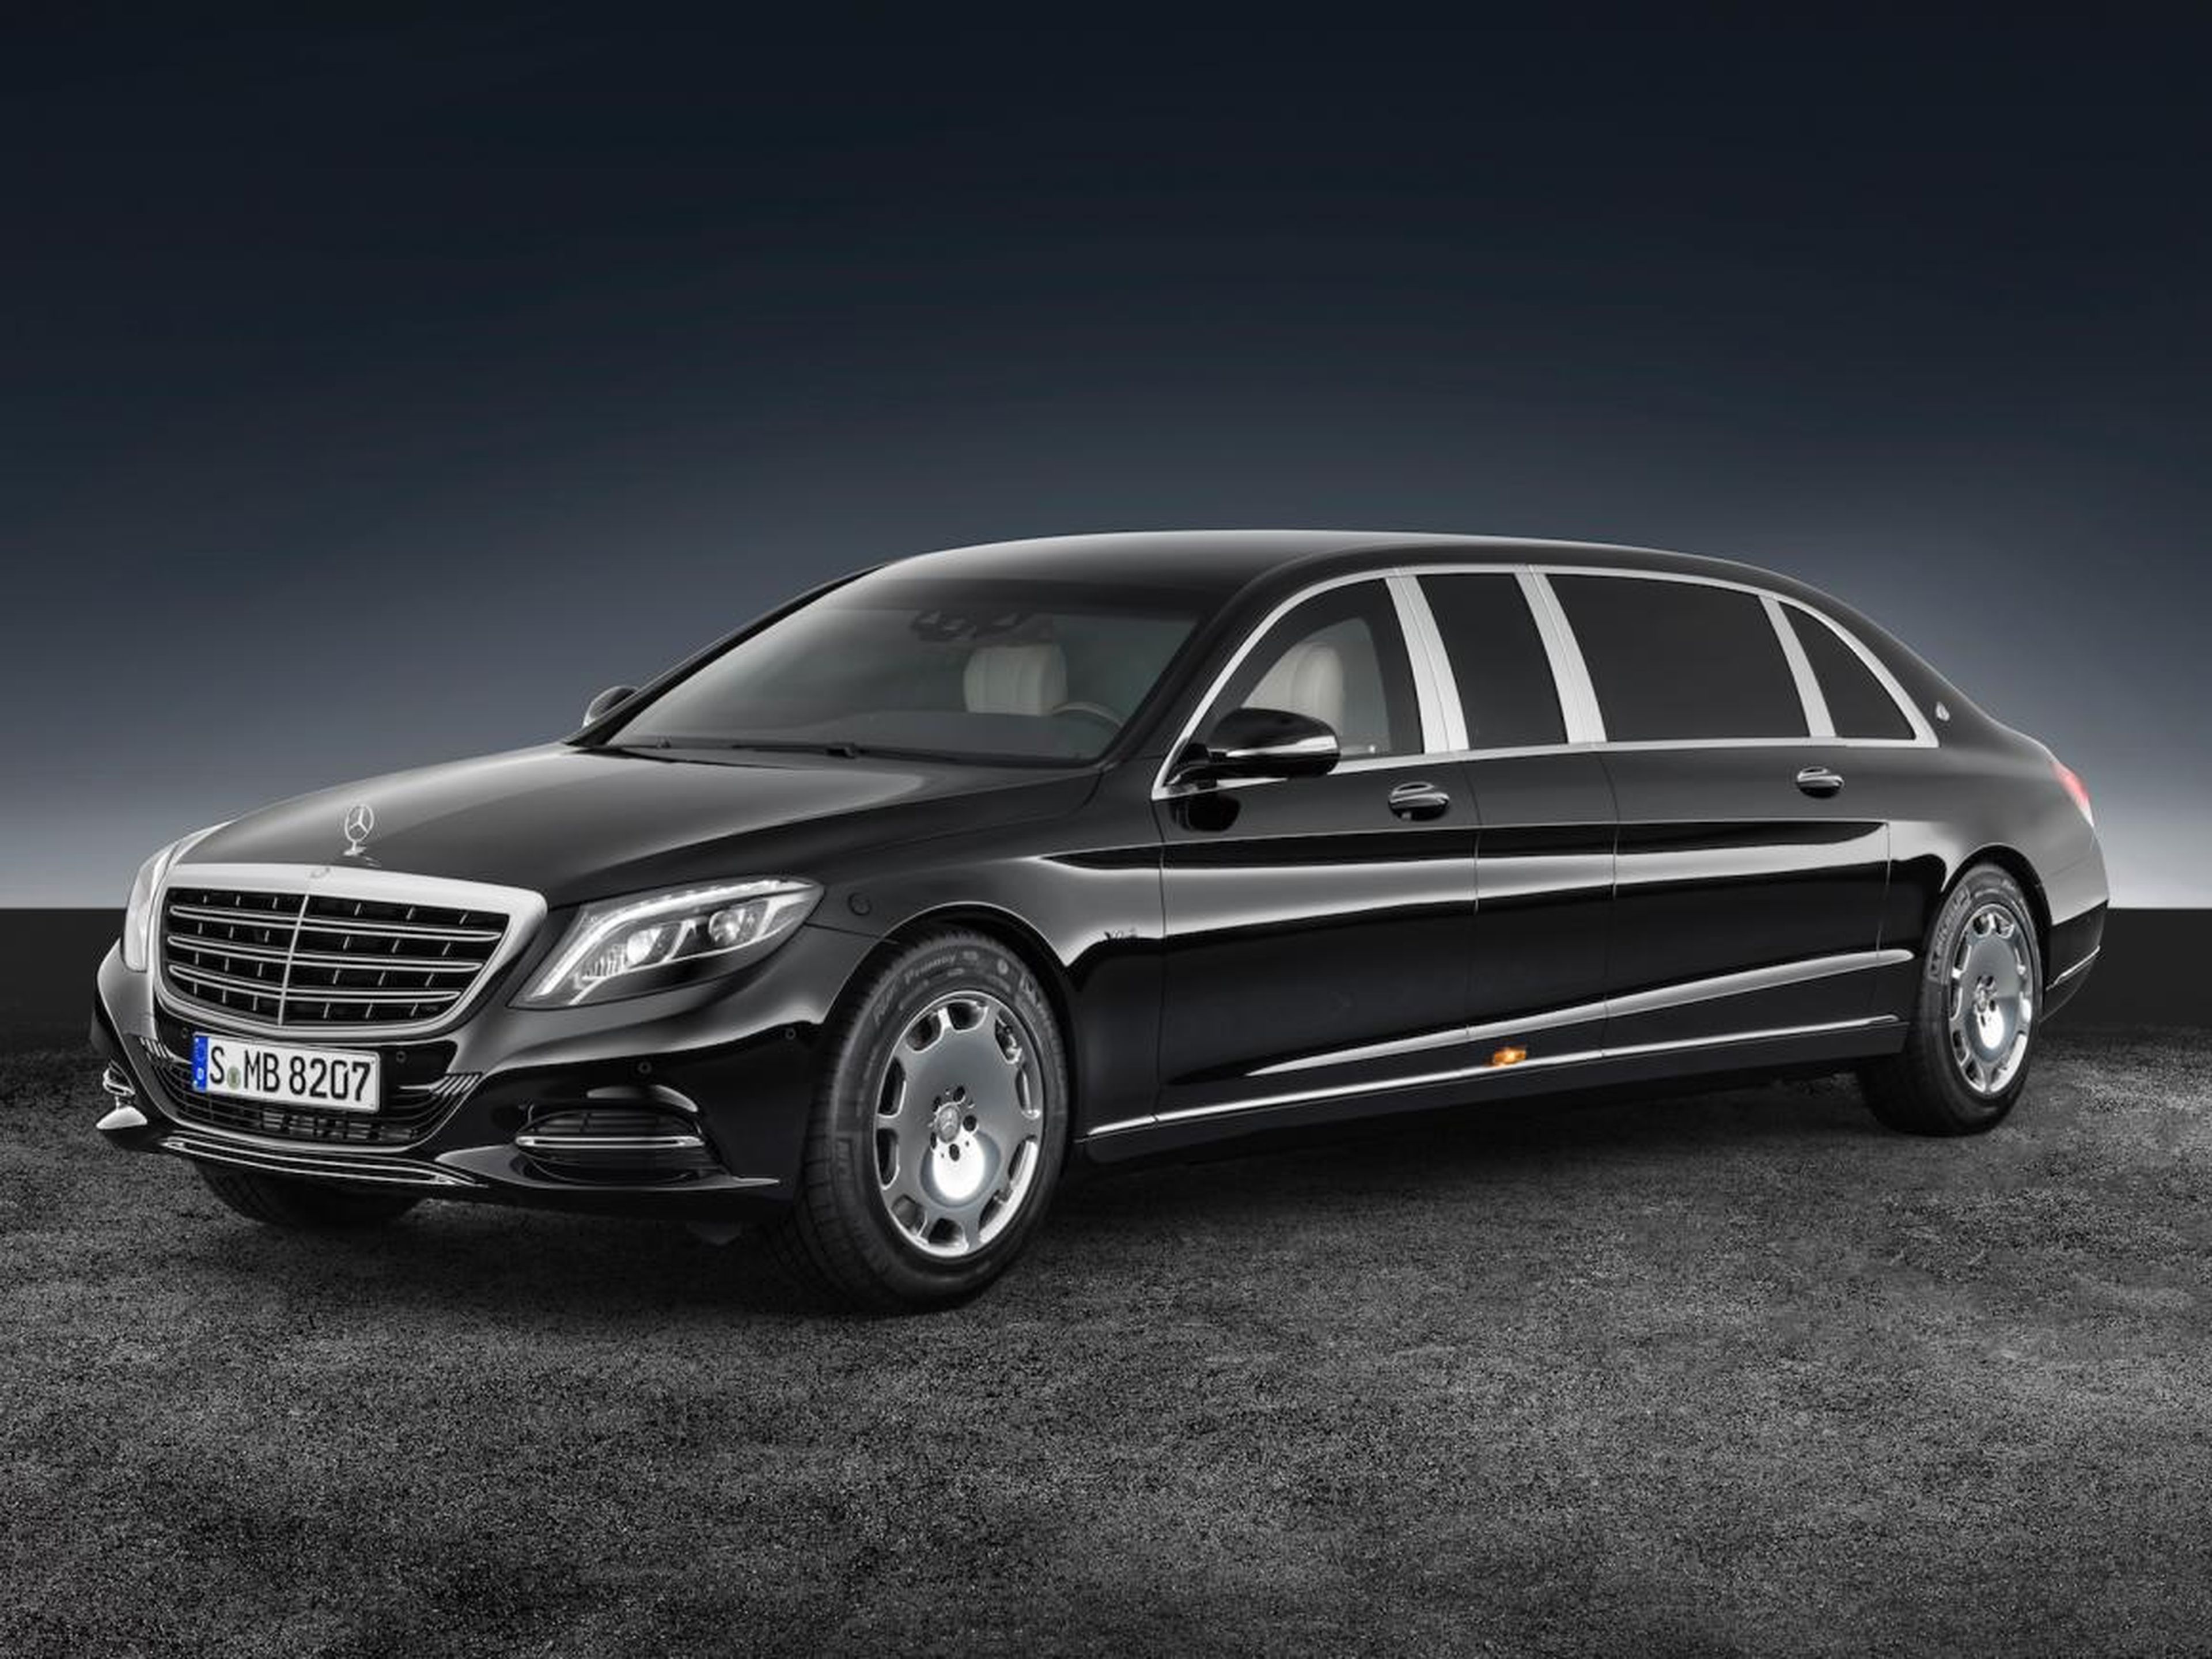 According to Mercedes, the S600 Pullman Guard lists for a whopping $1.57 million in its native Germany.